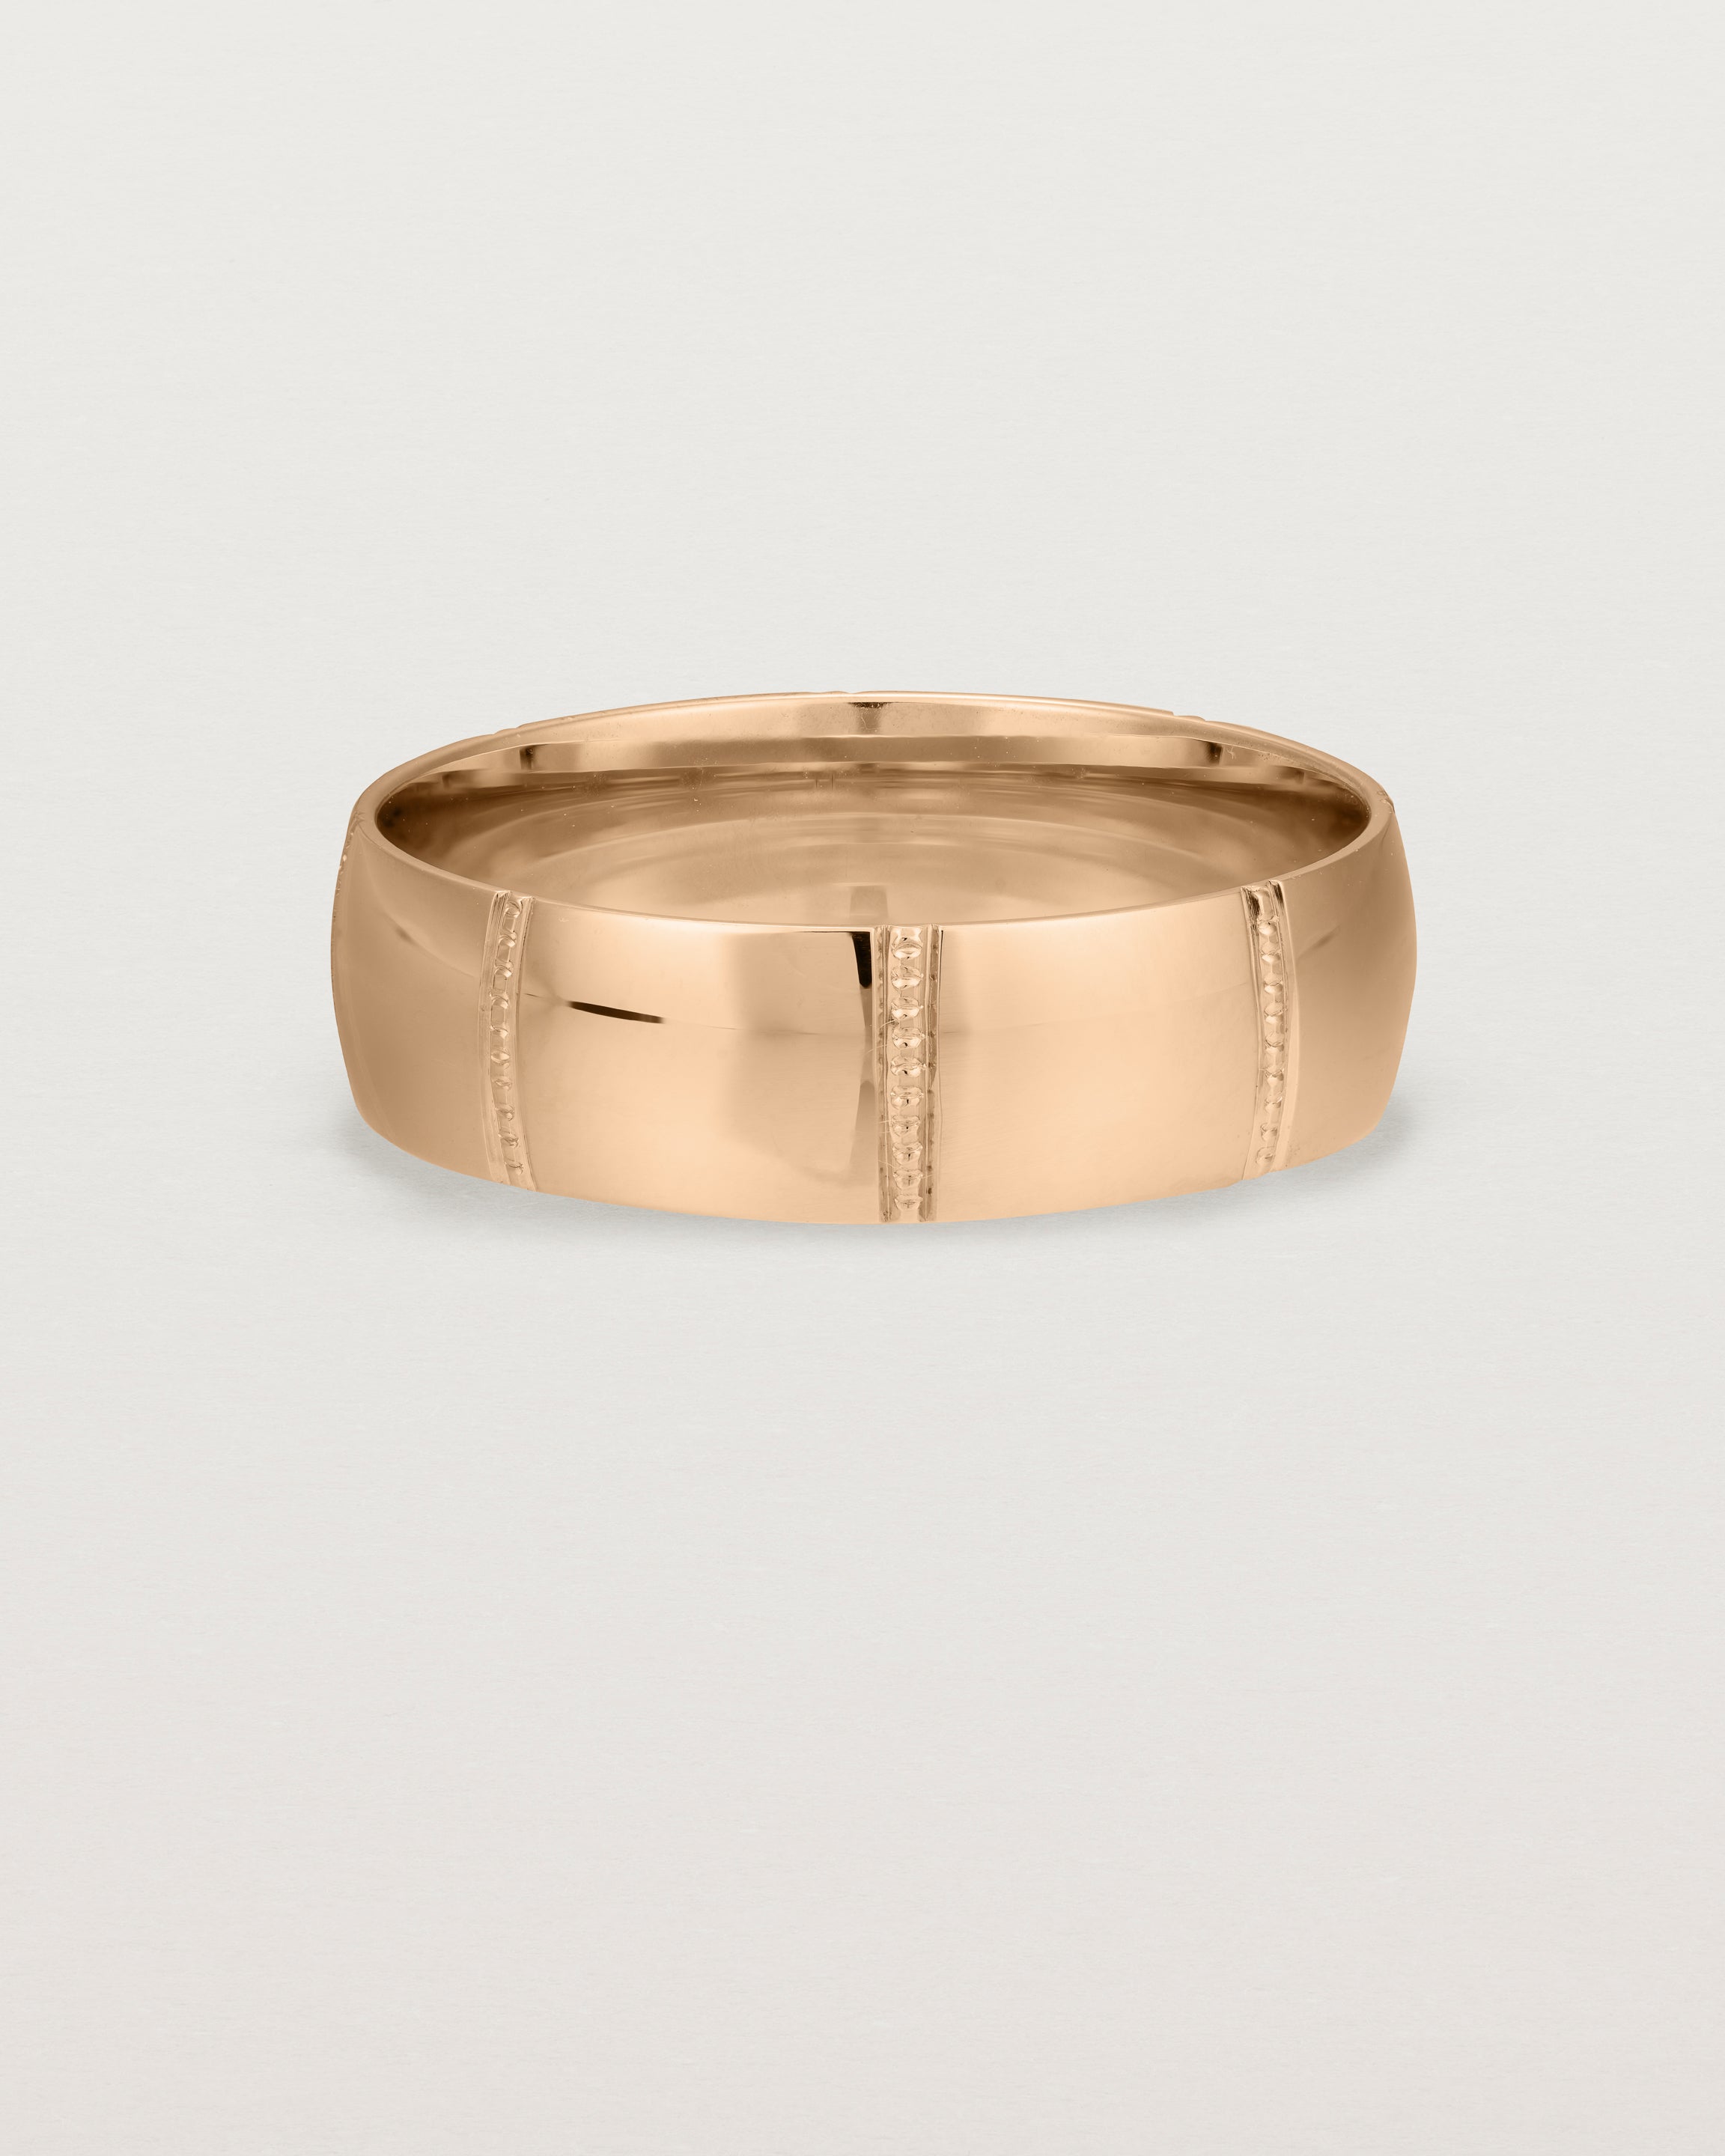 Front view of the Grain Wedding Ring | 6mm | Rose Gold.